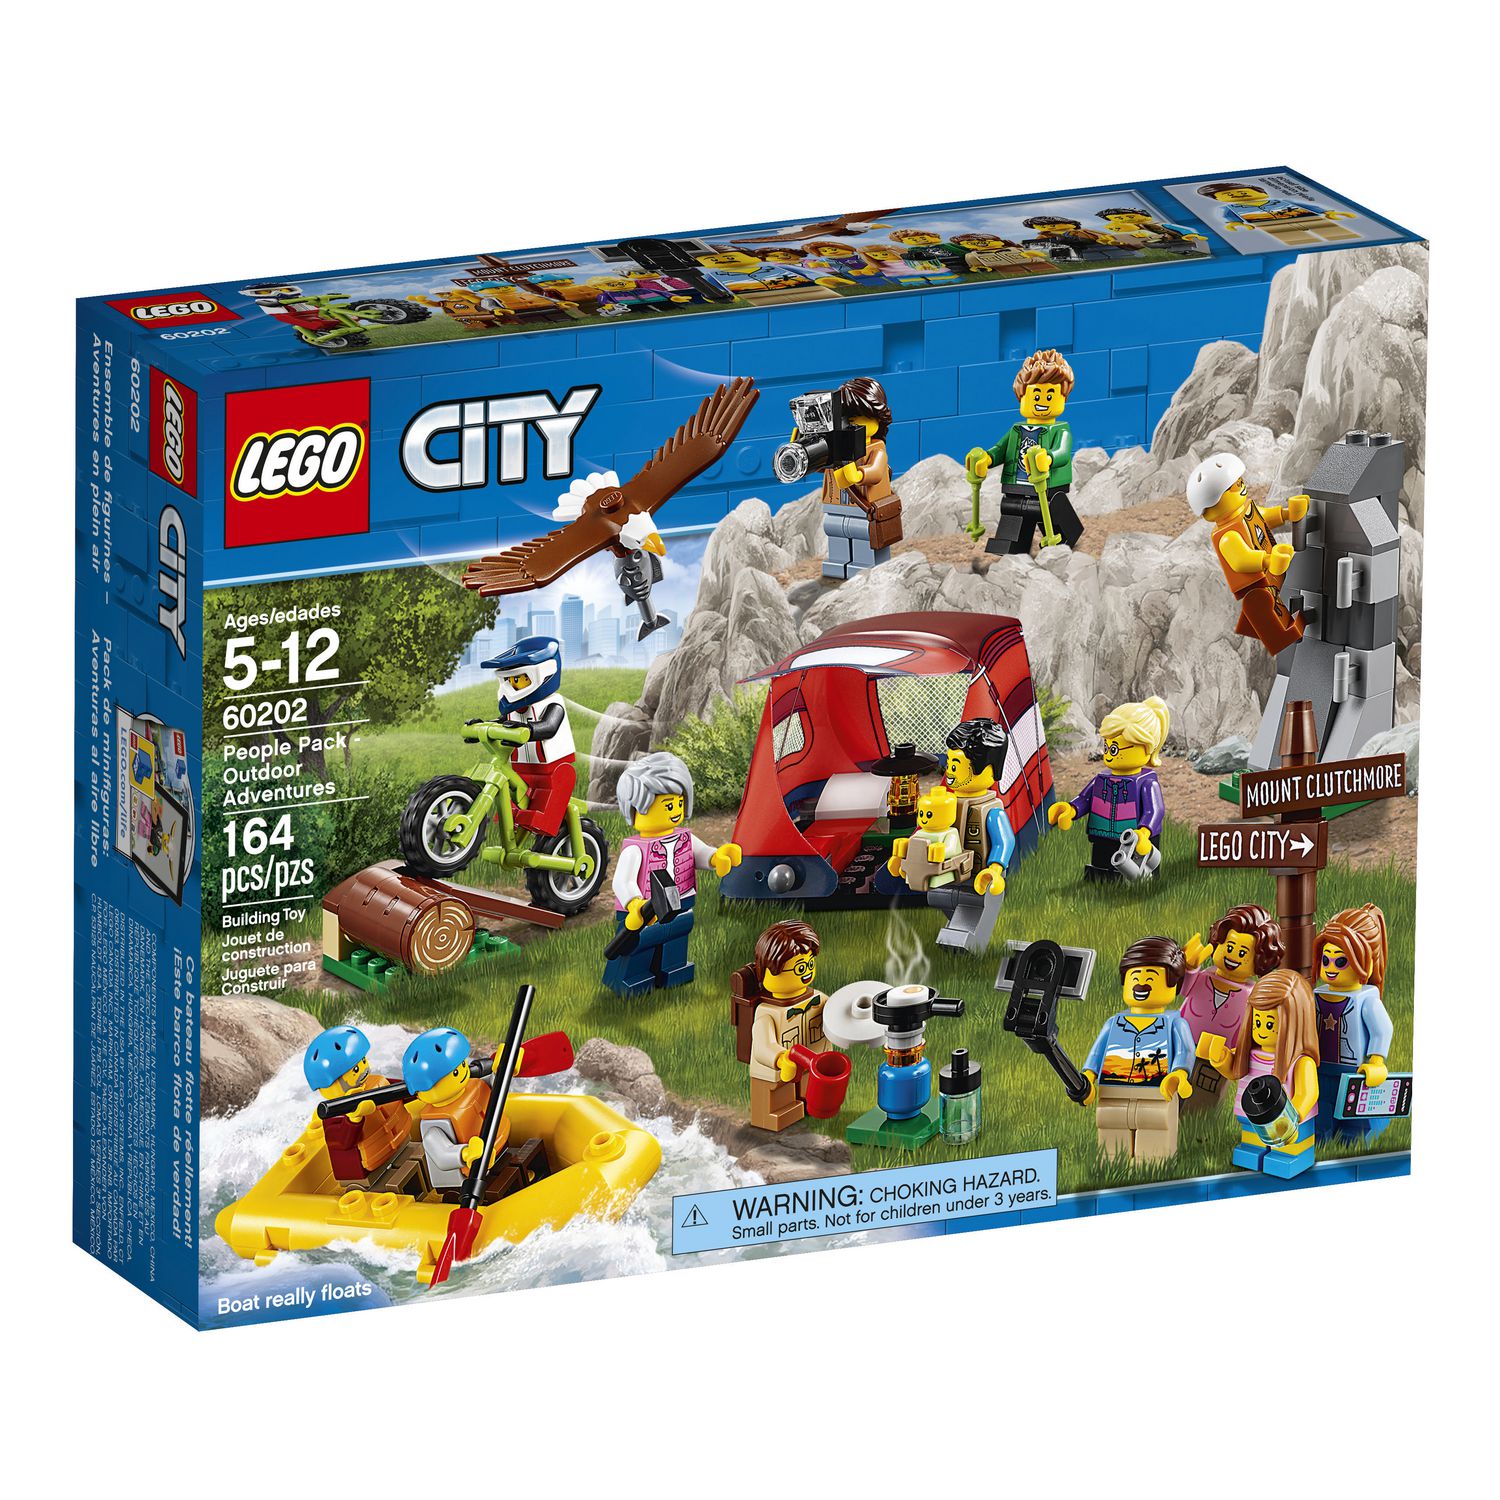 Outdoors Adventures 60202 Building Kit 164 Piece LEGO City People Pack 